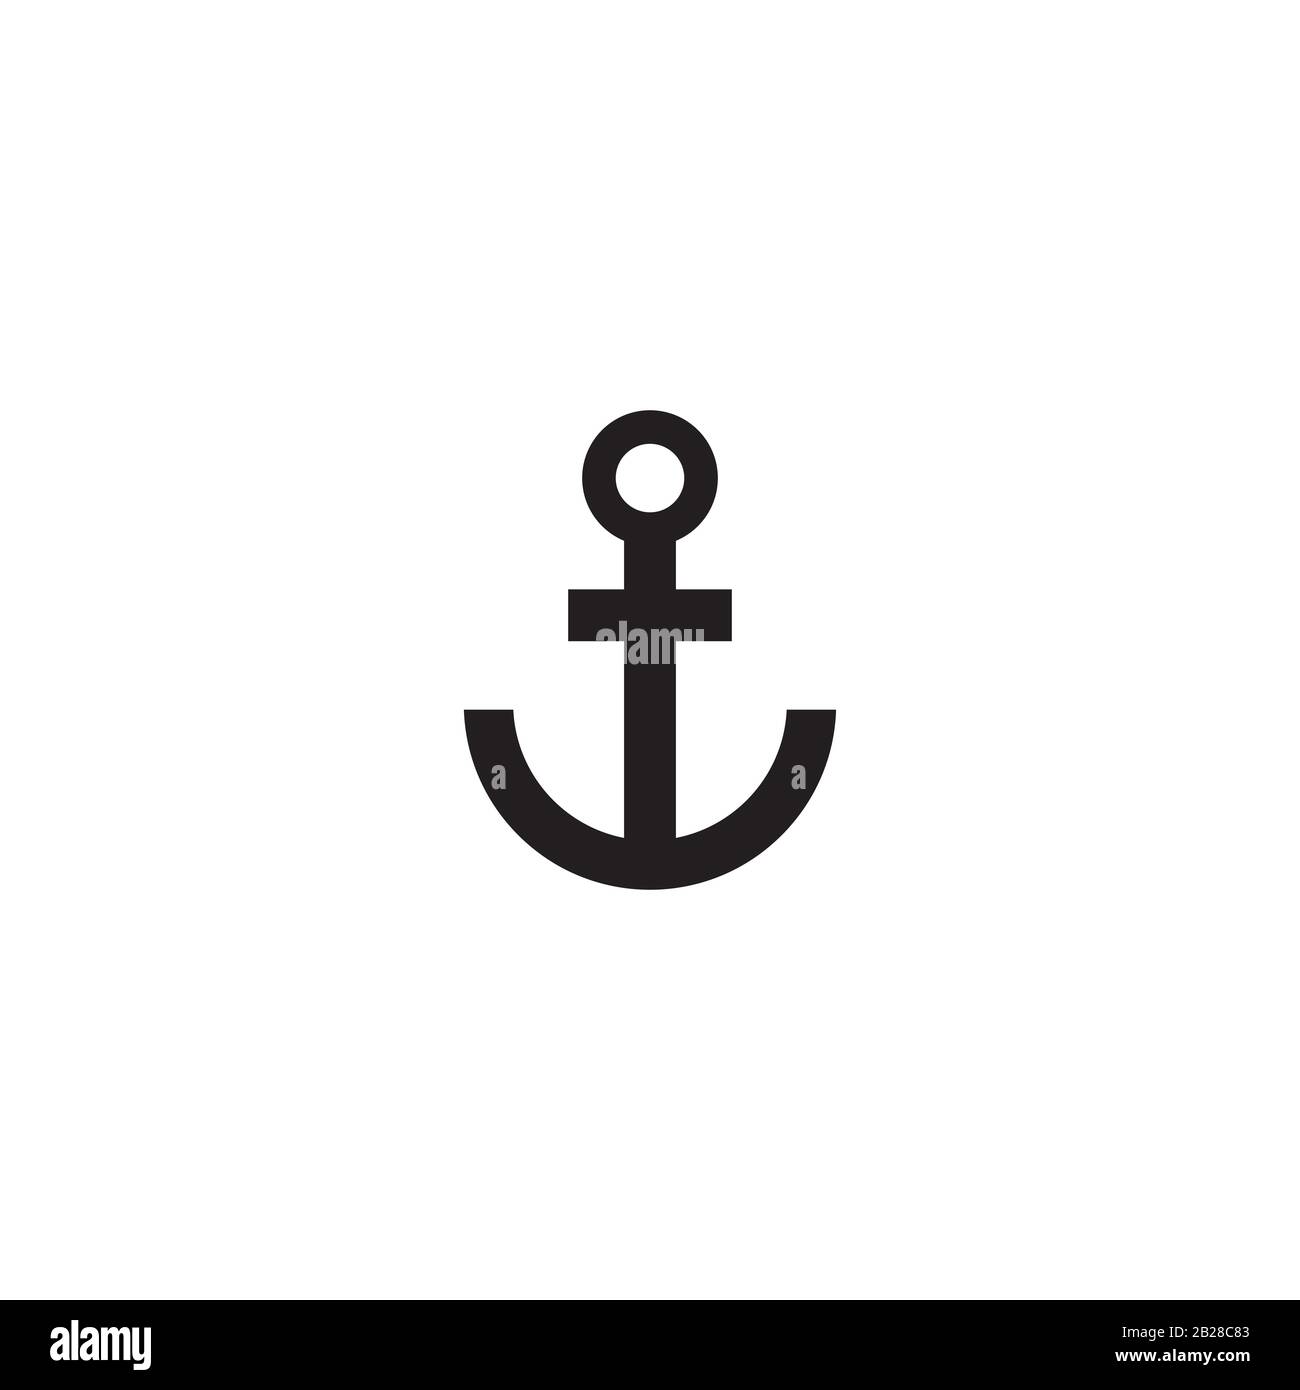 Anchor icon isolated on white background. Anchor icon simple sign